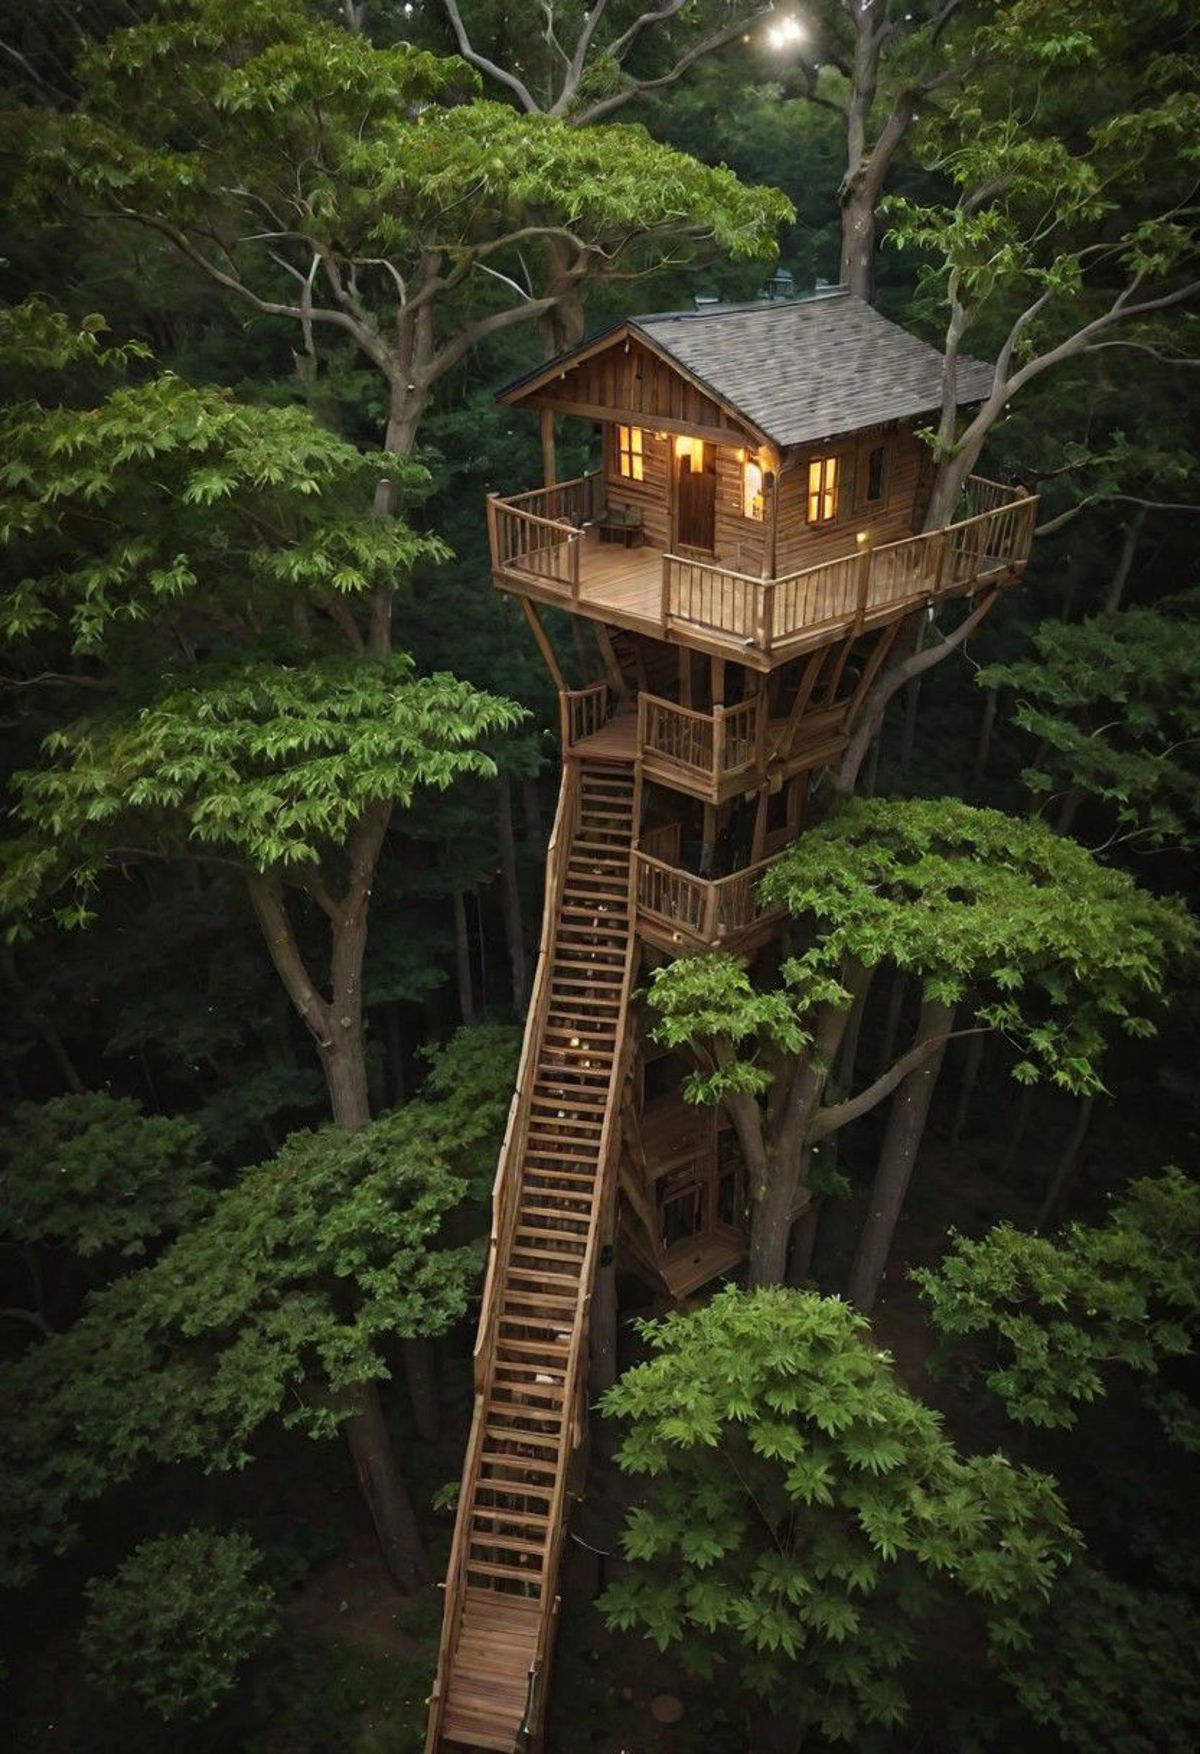 A tall wooden tower with a light on in the window, surrounded by a forest.